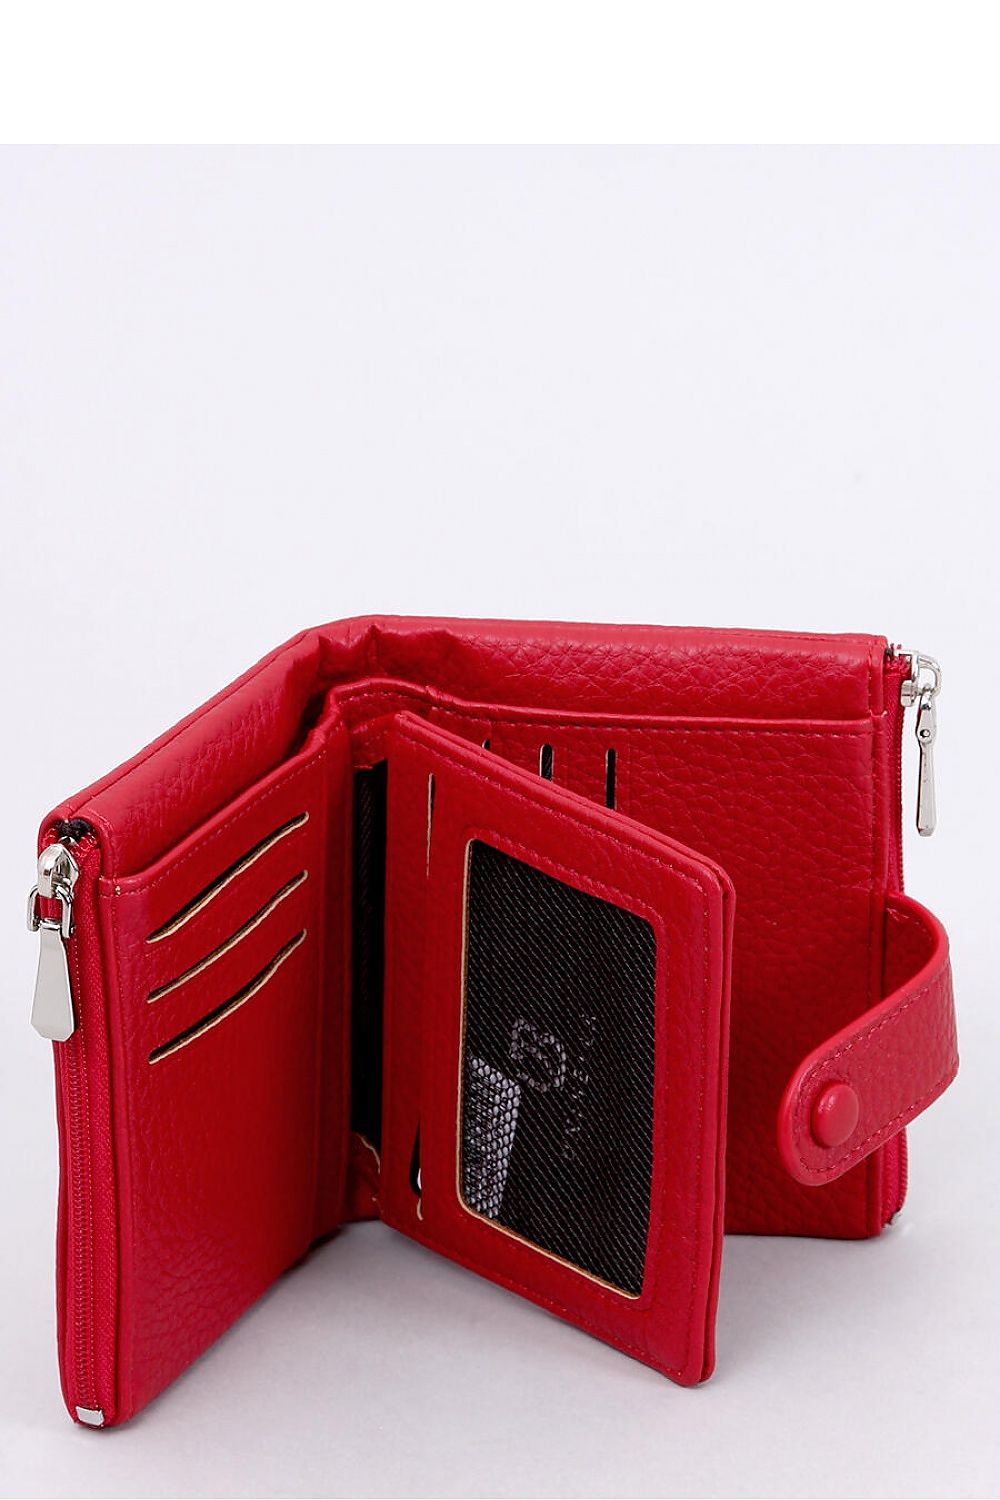 Women`s wallet - M&H FashionWomen`s walletM&H FashionM&H Fashion189661_1103919one-size-fits-allwallet InelloM&H FashionM&H FashionClassic women's wallet. This small but practical model will definitely meet your expectations.... It will also be perfect as a gift : ) Inside there are numerous comWomen`s wallet